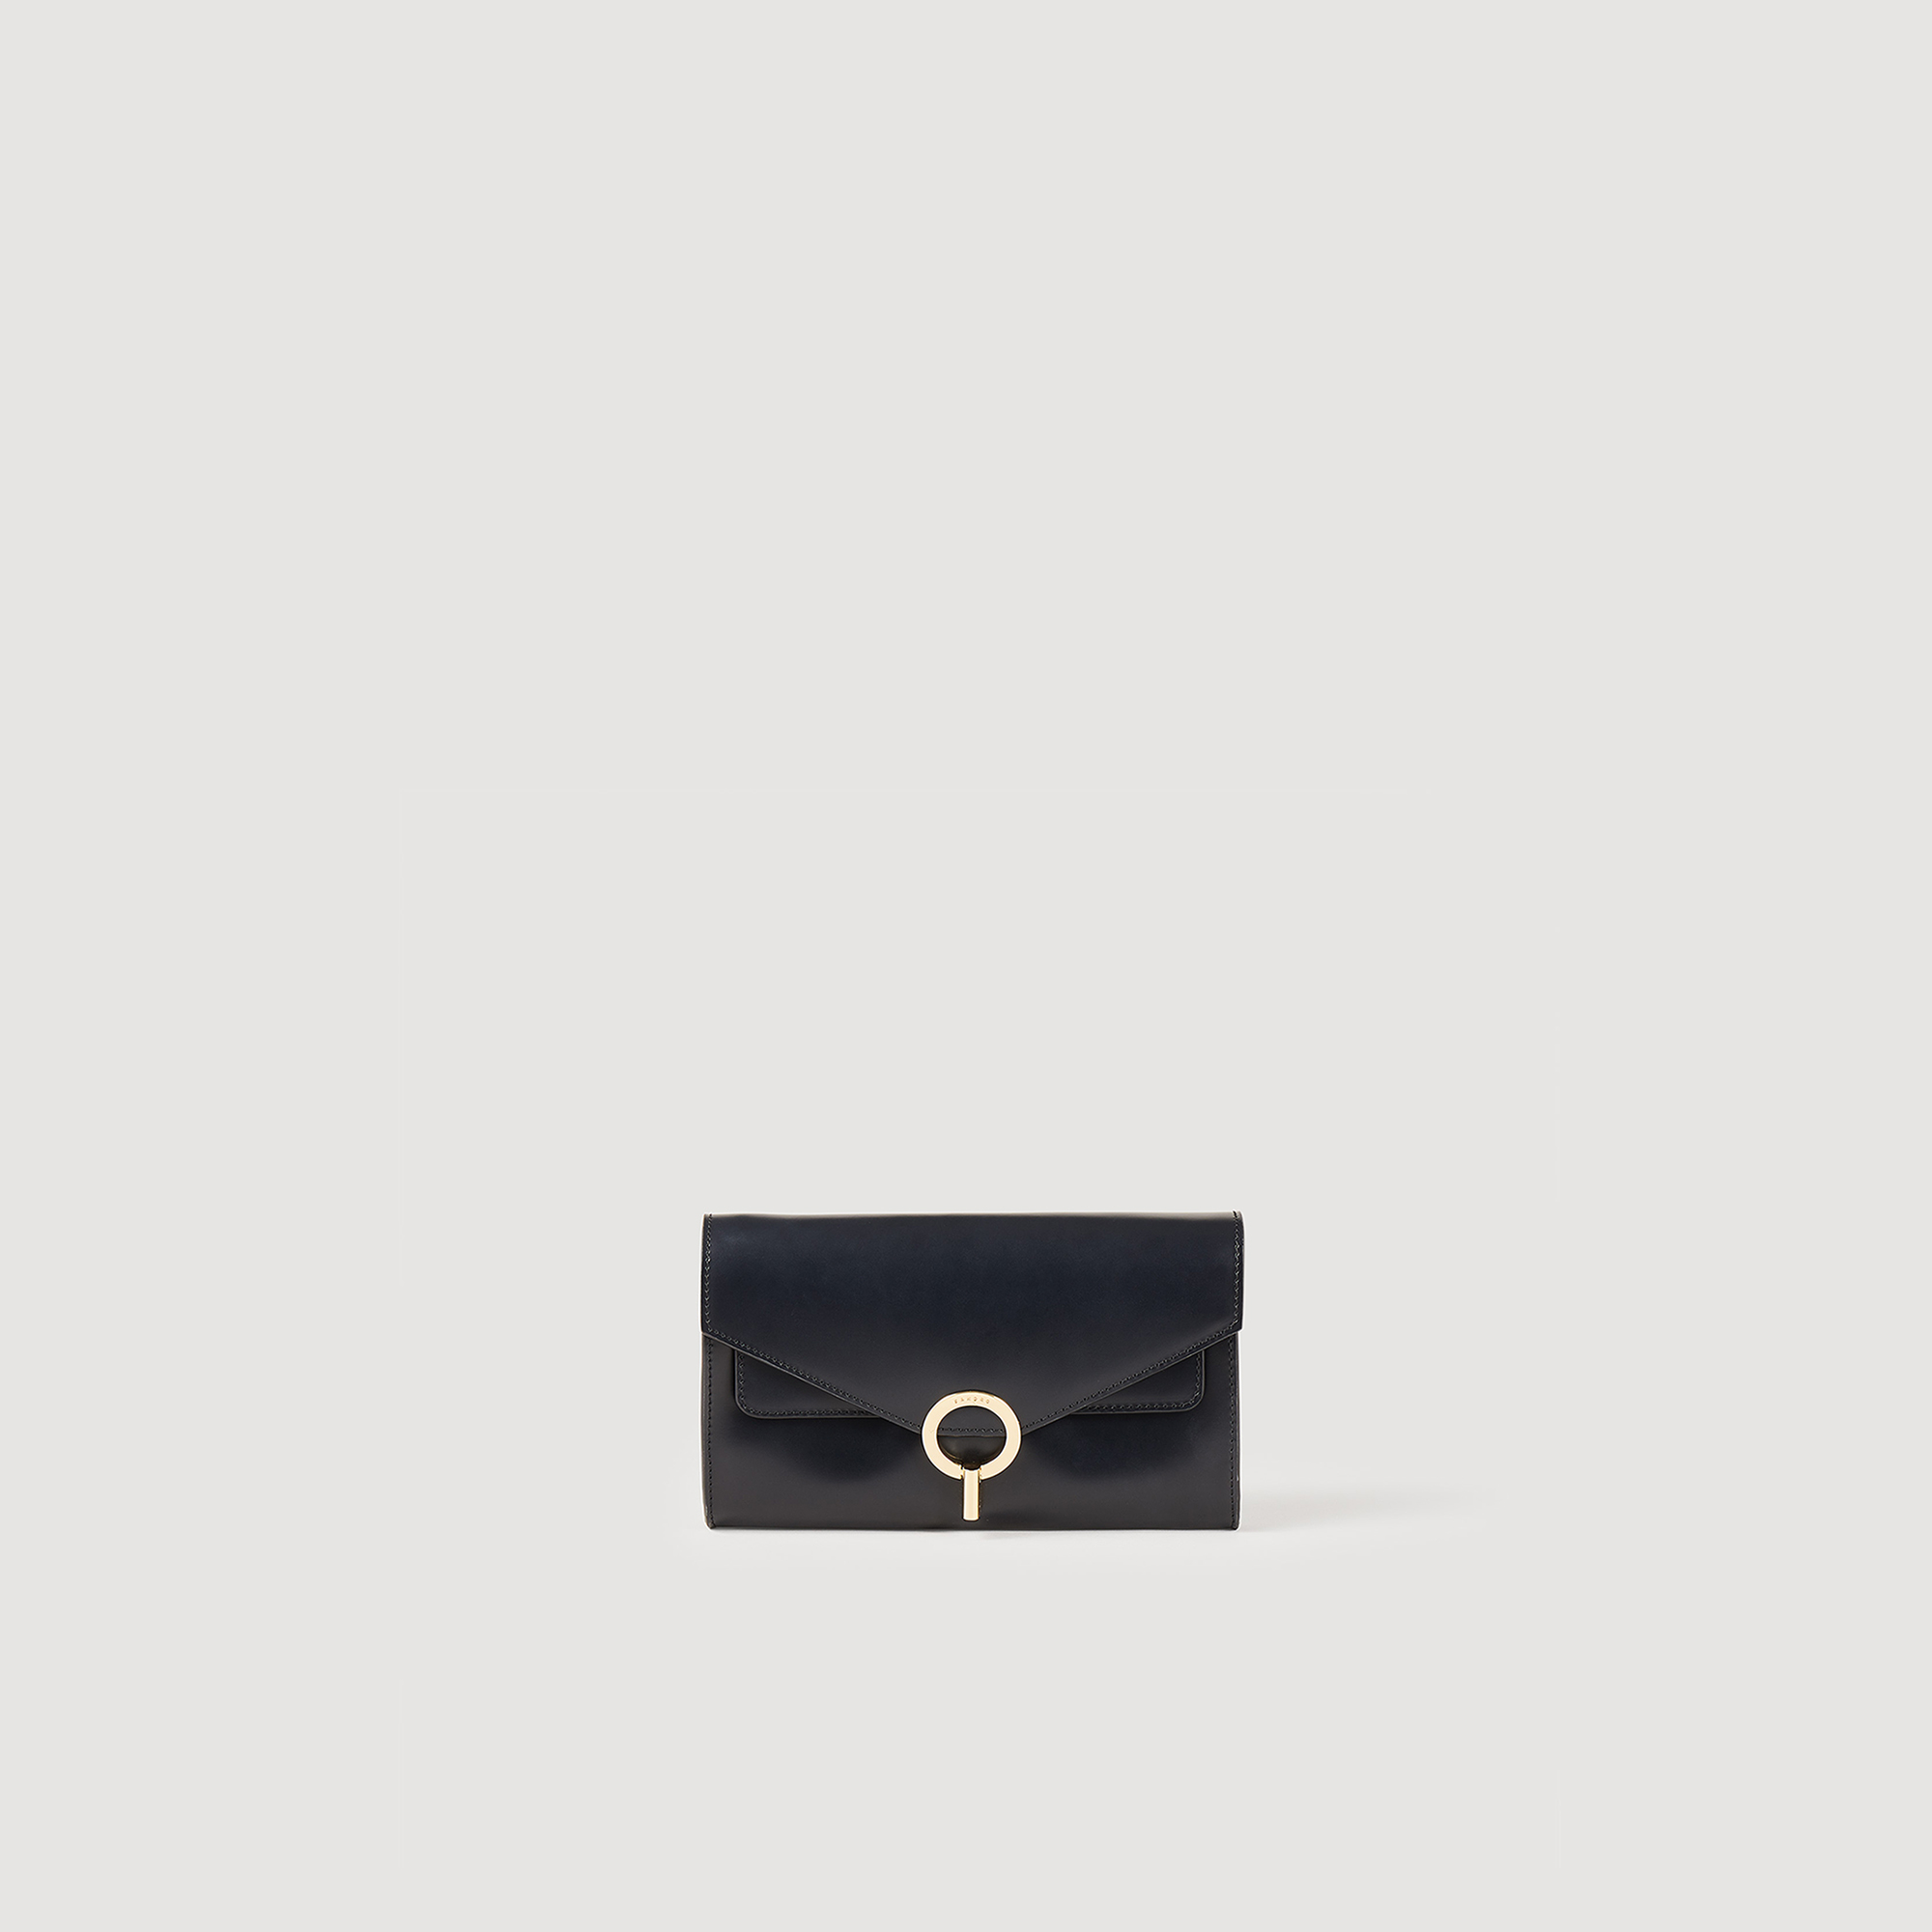 Sandro cotton Leather: cow Flap lining: The iconic Yza Bag in canvas and leather